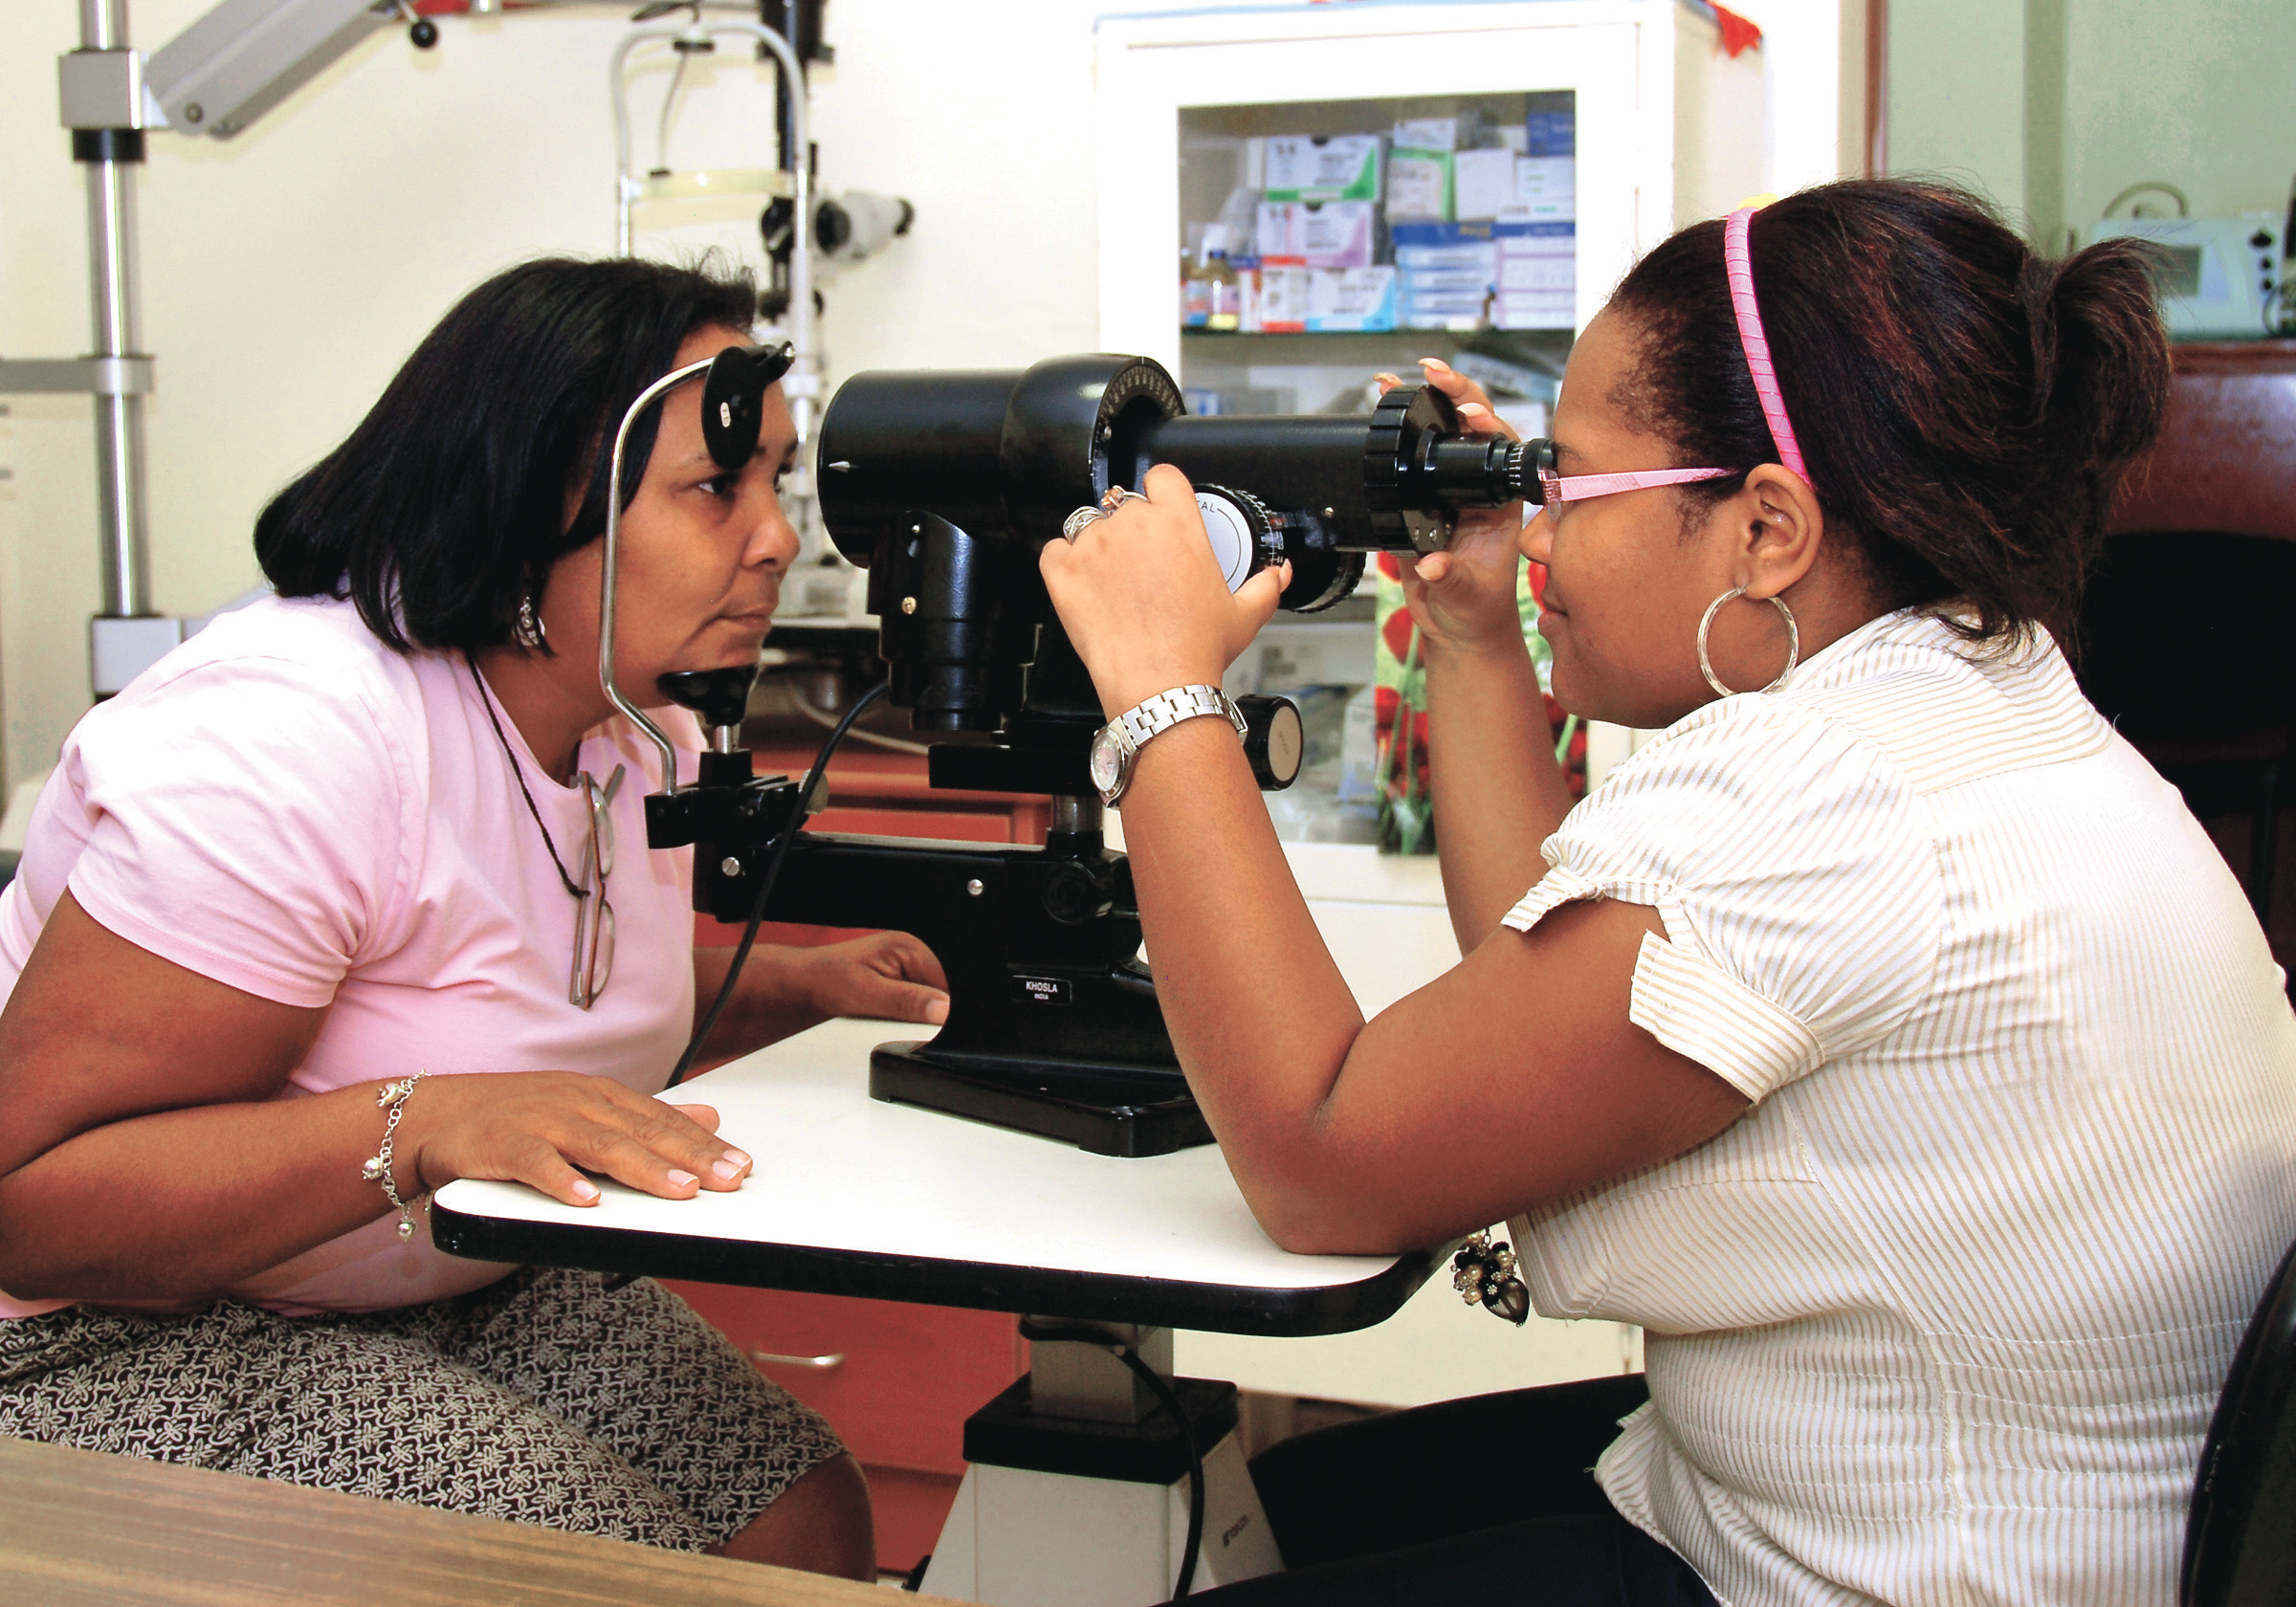 A Dominican woman in a light pink shirt sitting and resting her chin on an eye examination device while a doctor checks her eyesight.